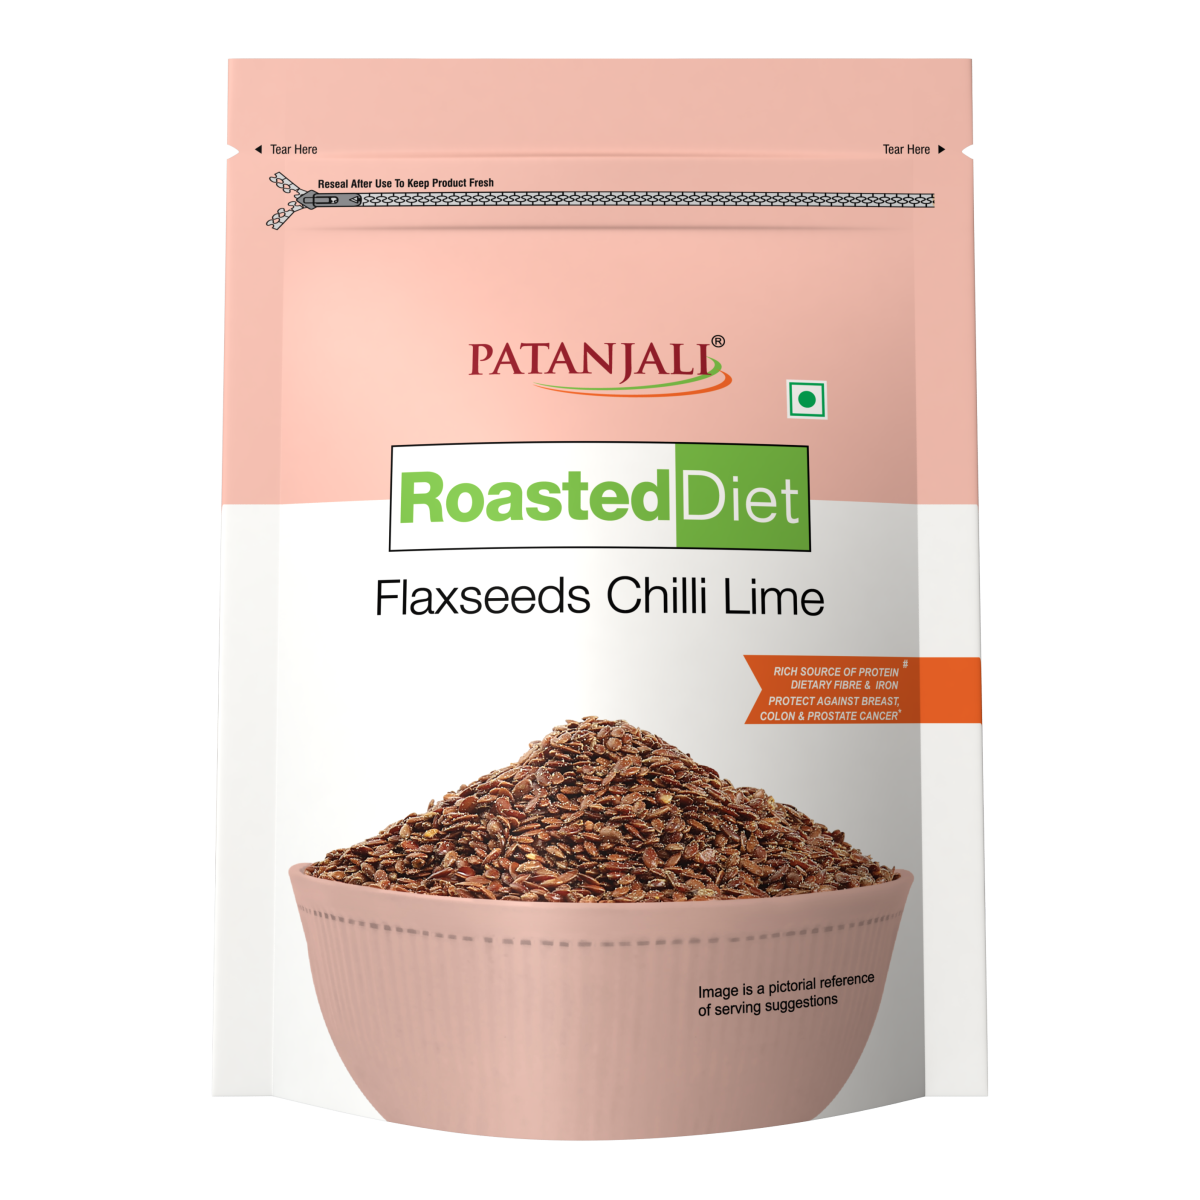 Roasted Diet- Flaxseed Chili Lime